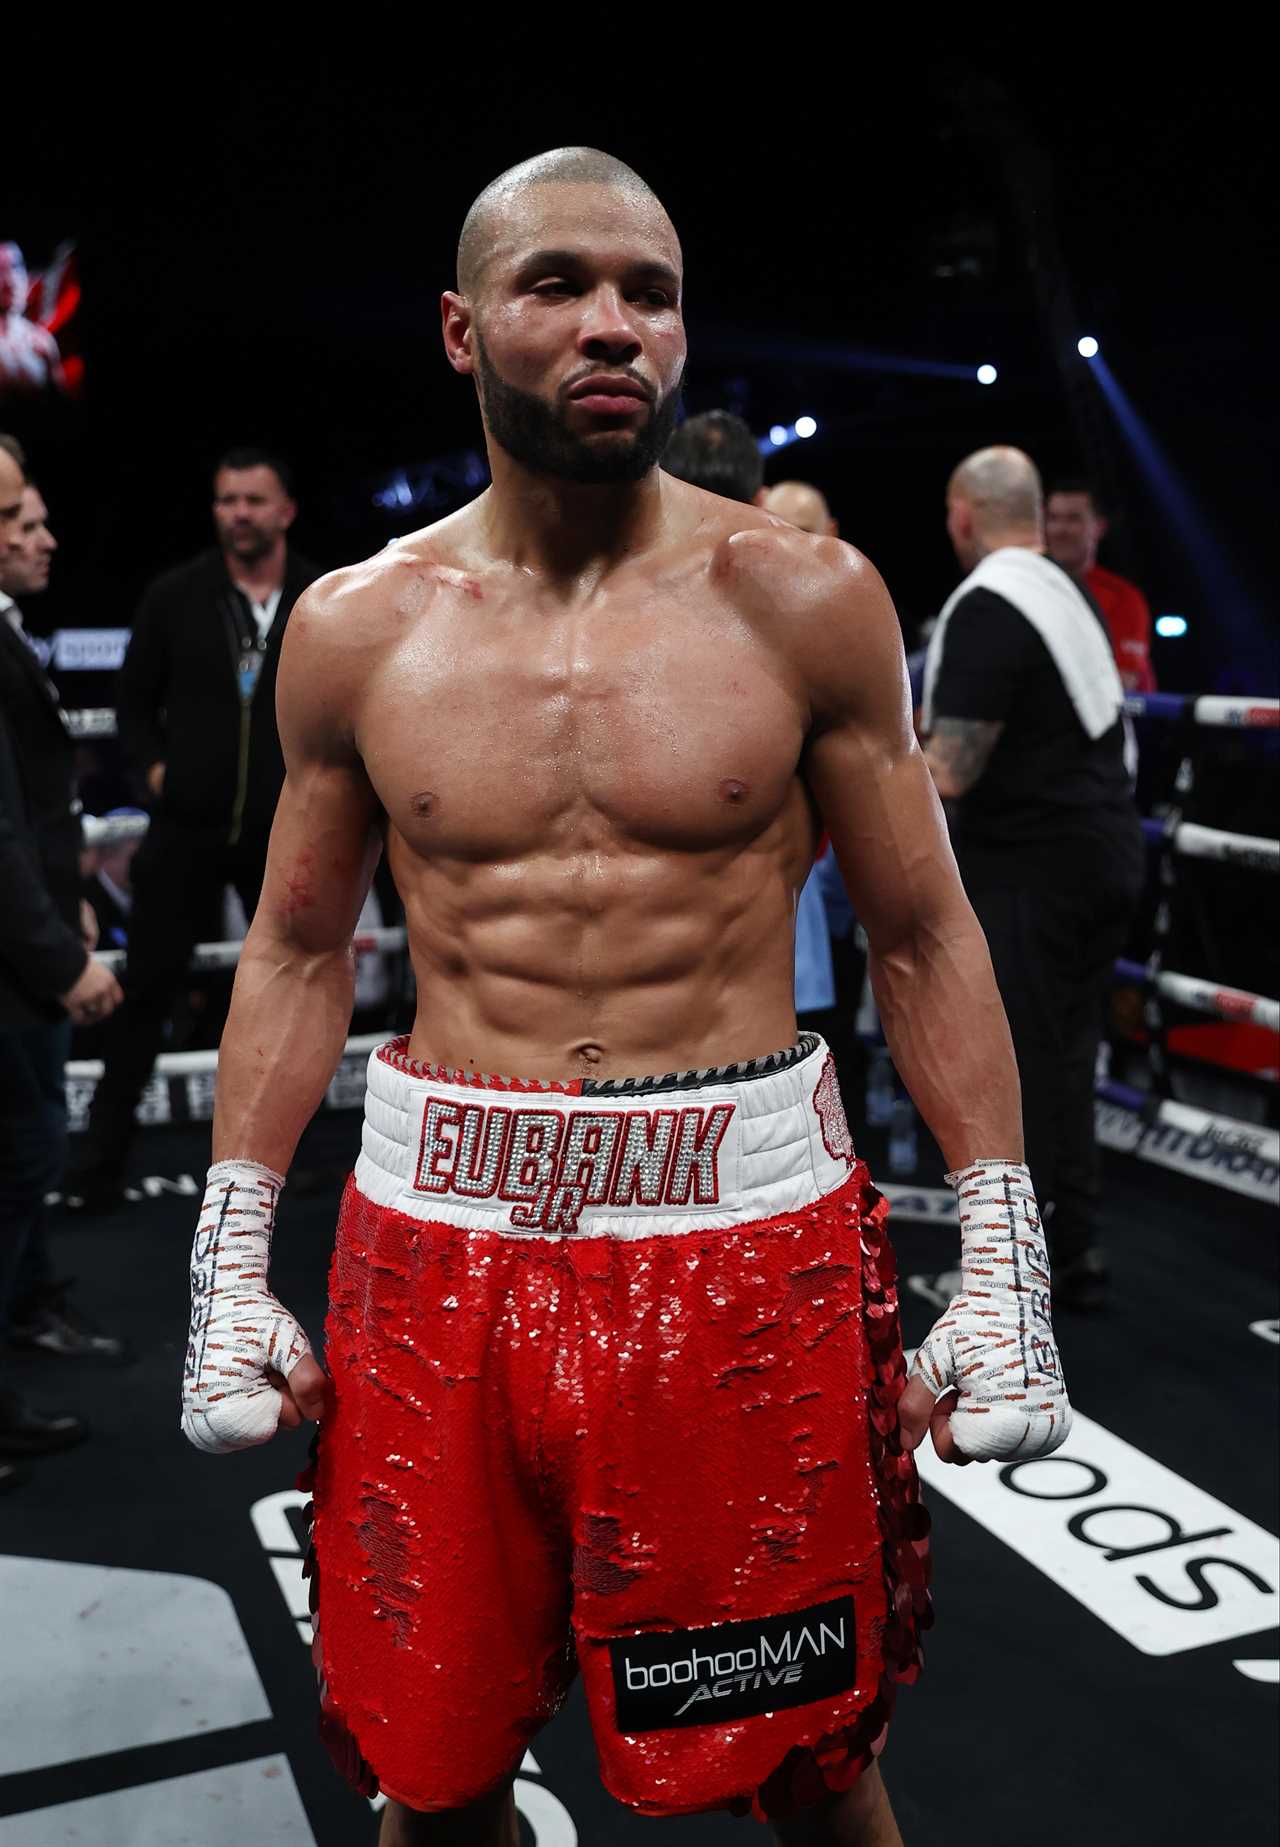 Chris Eubank Jr. tells GennadyGolovkin to fight him December or RETIRE. Brit vows to look after' the titles